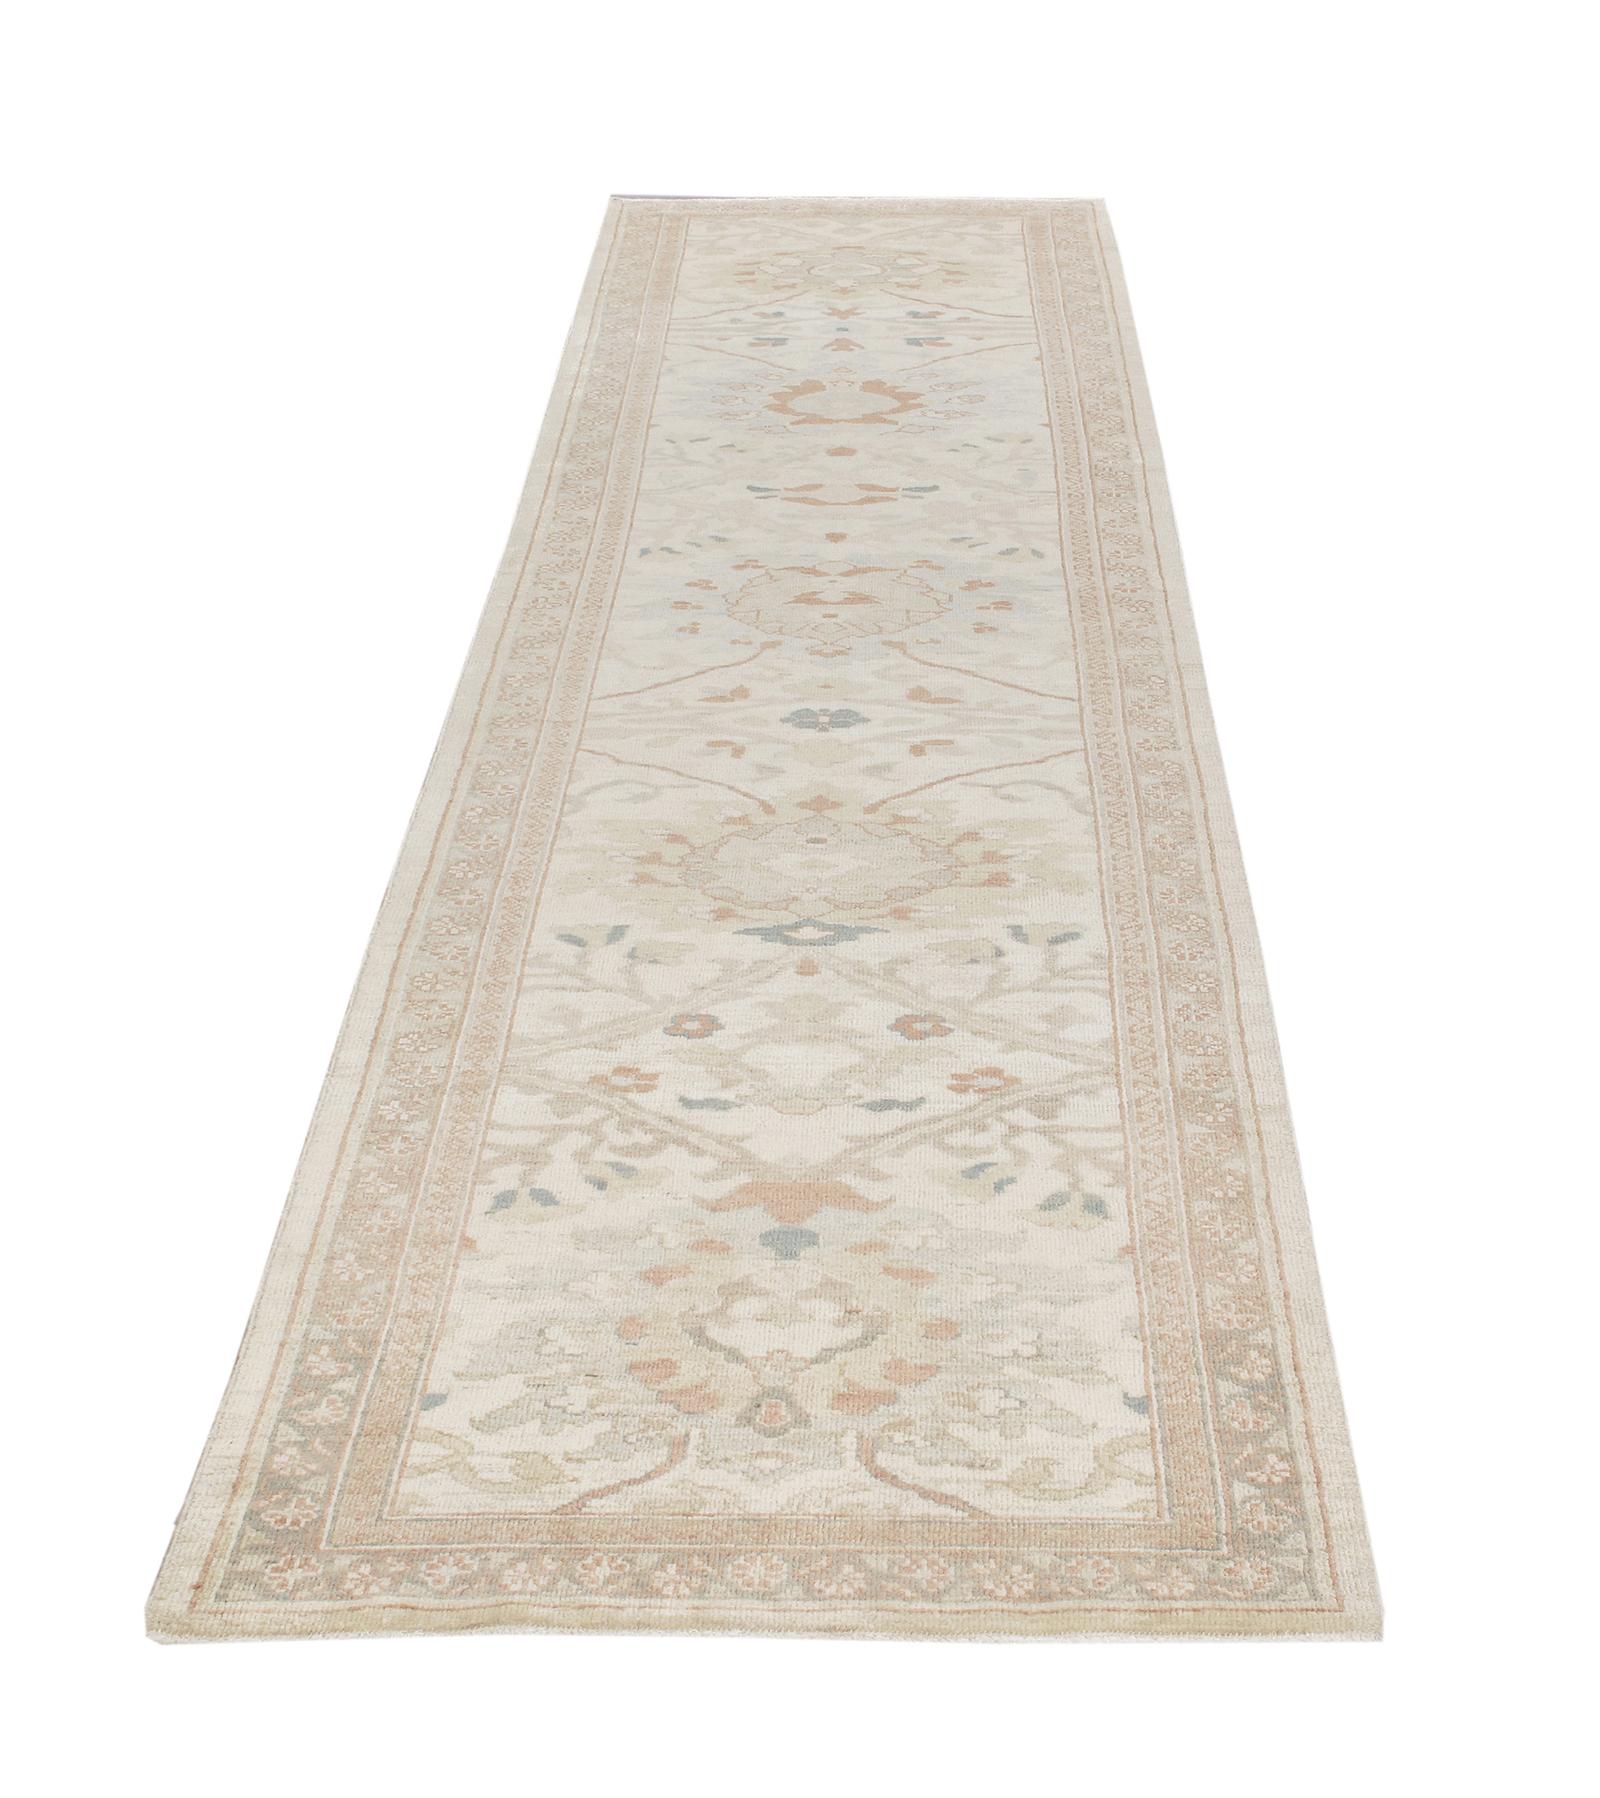 Hand-Knotted Persian Ziegler Sultanabad Handknotted Runner Rug in Camel and Beige Color For Sale